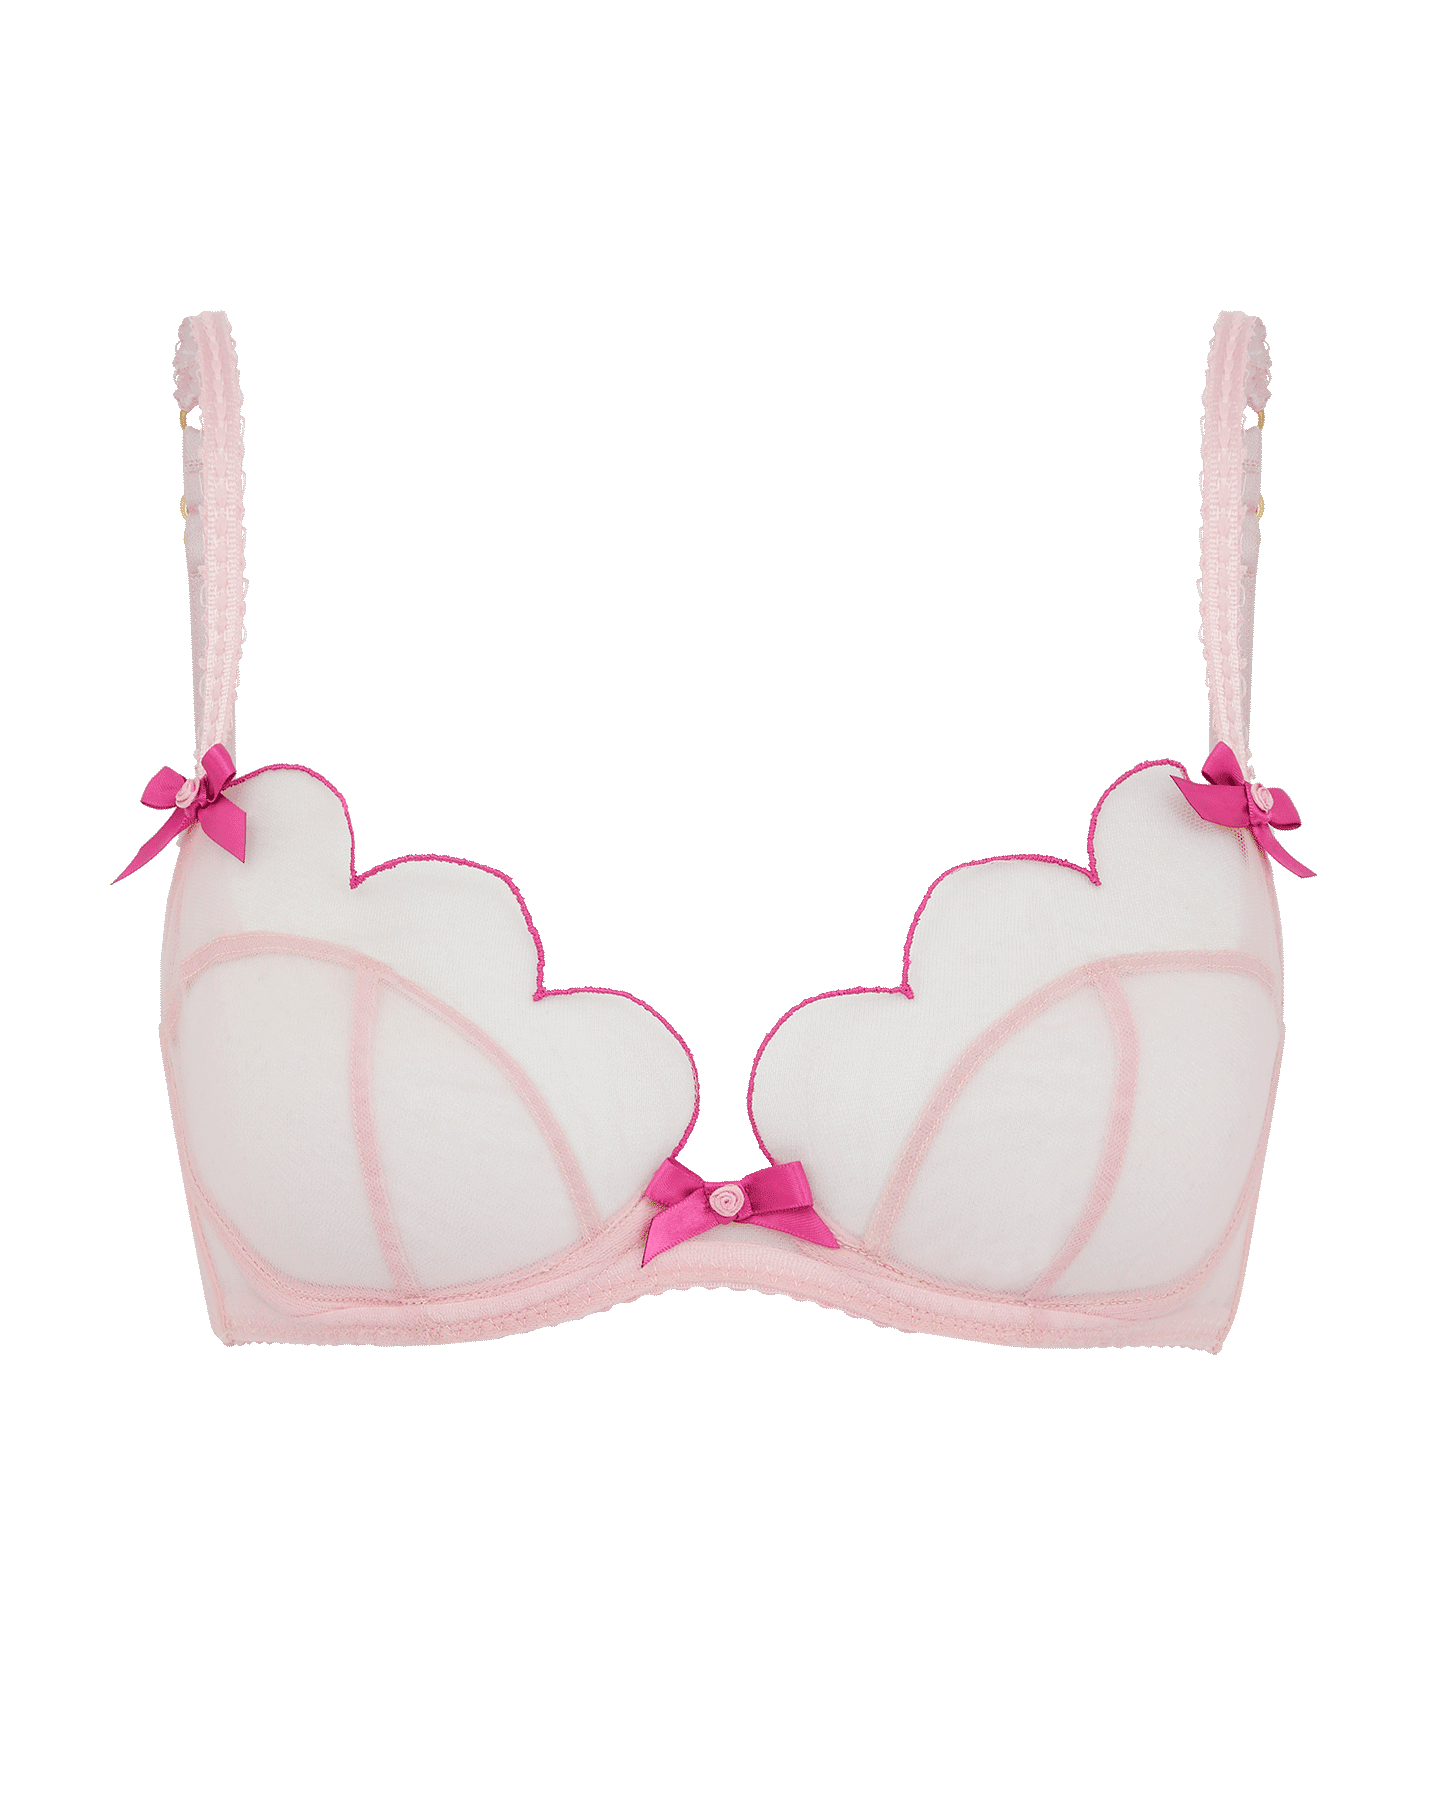 Agent Provocateur, Lorna Bow-embellished Embroidered Tulle Underwired  Soft-cup Bra, Pink, 32A,34A,32B,34B,36B,32C,34C,36C,38C,32D,34D,36D,38D,32DD,34DD,36DD,38DD,32E, 34E,36E,38E,32F,34F,36F